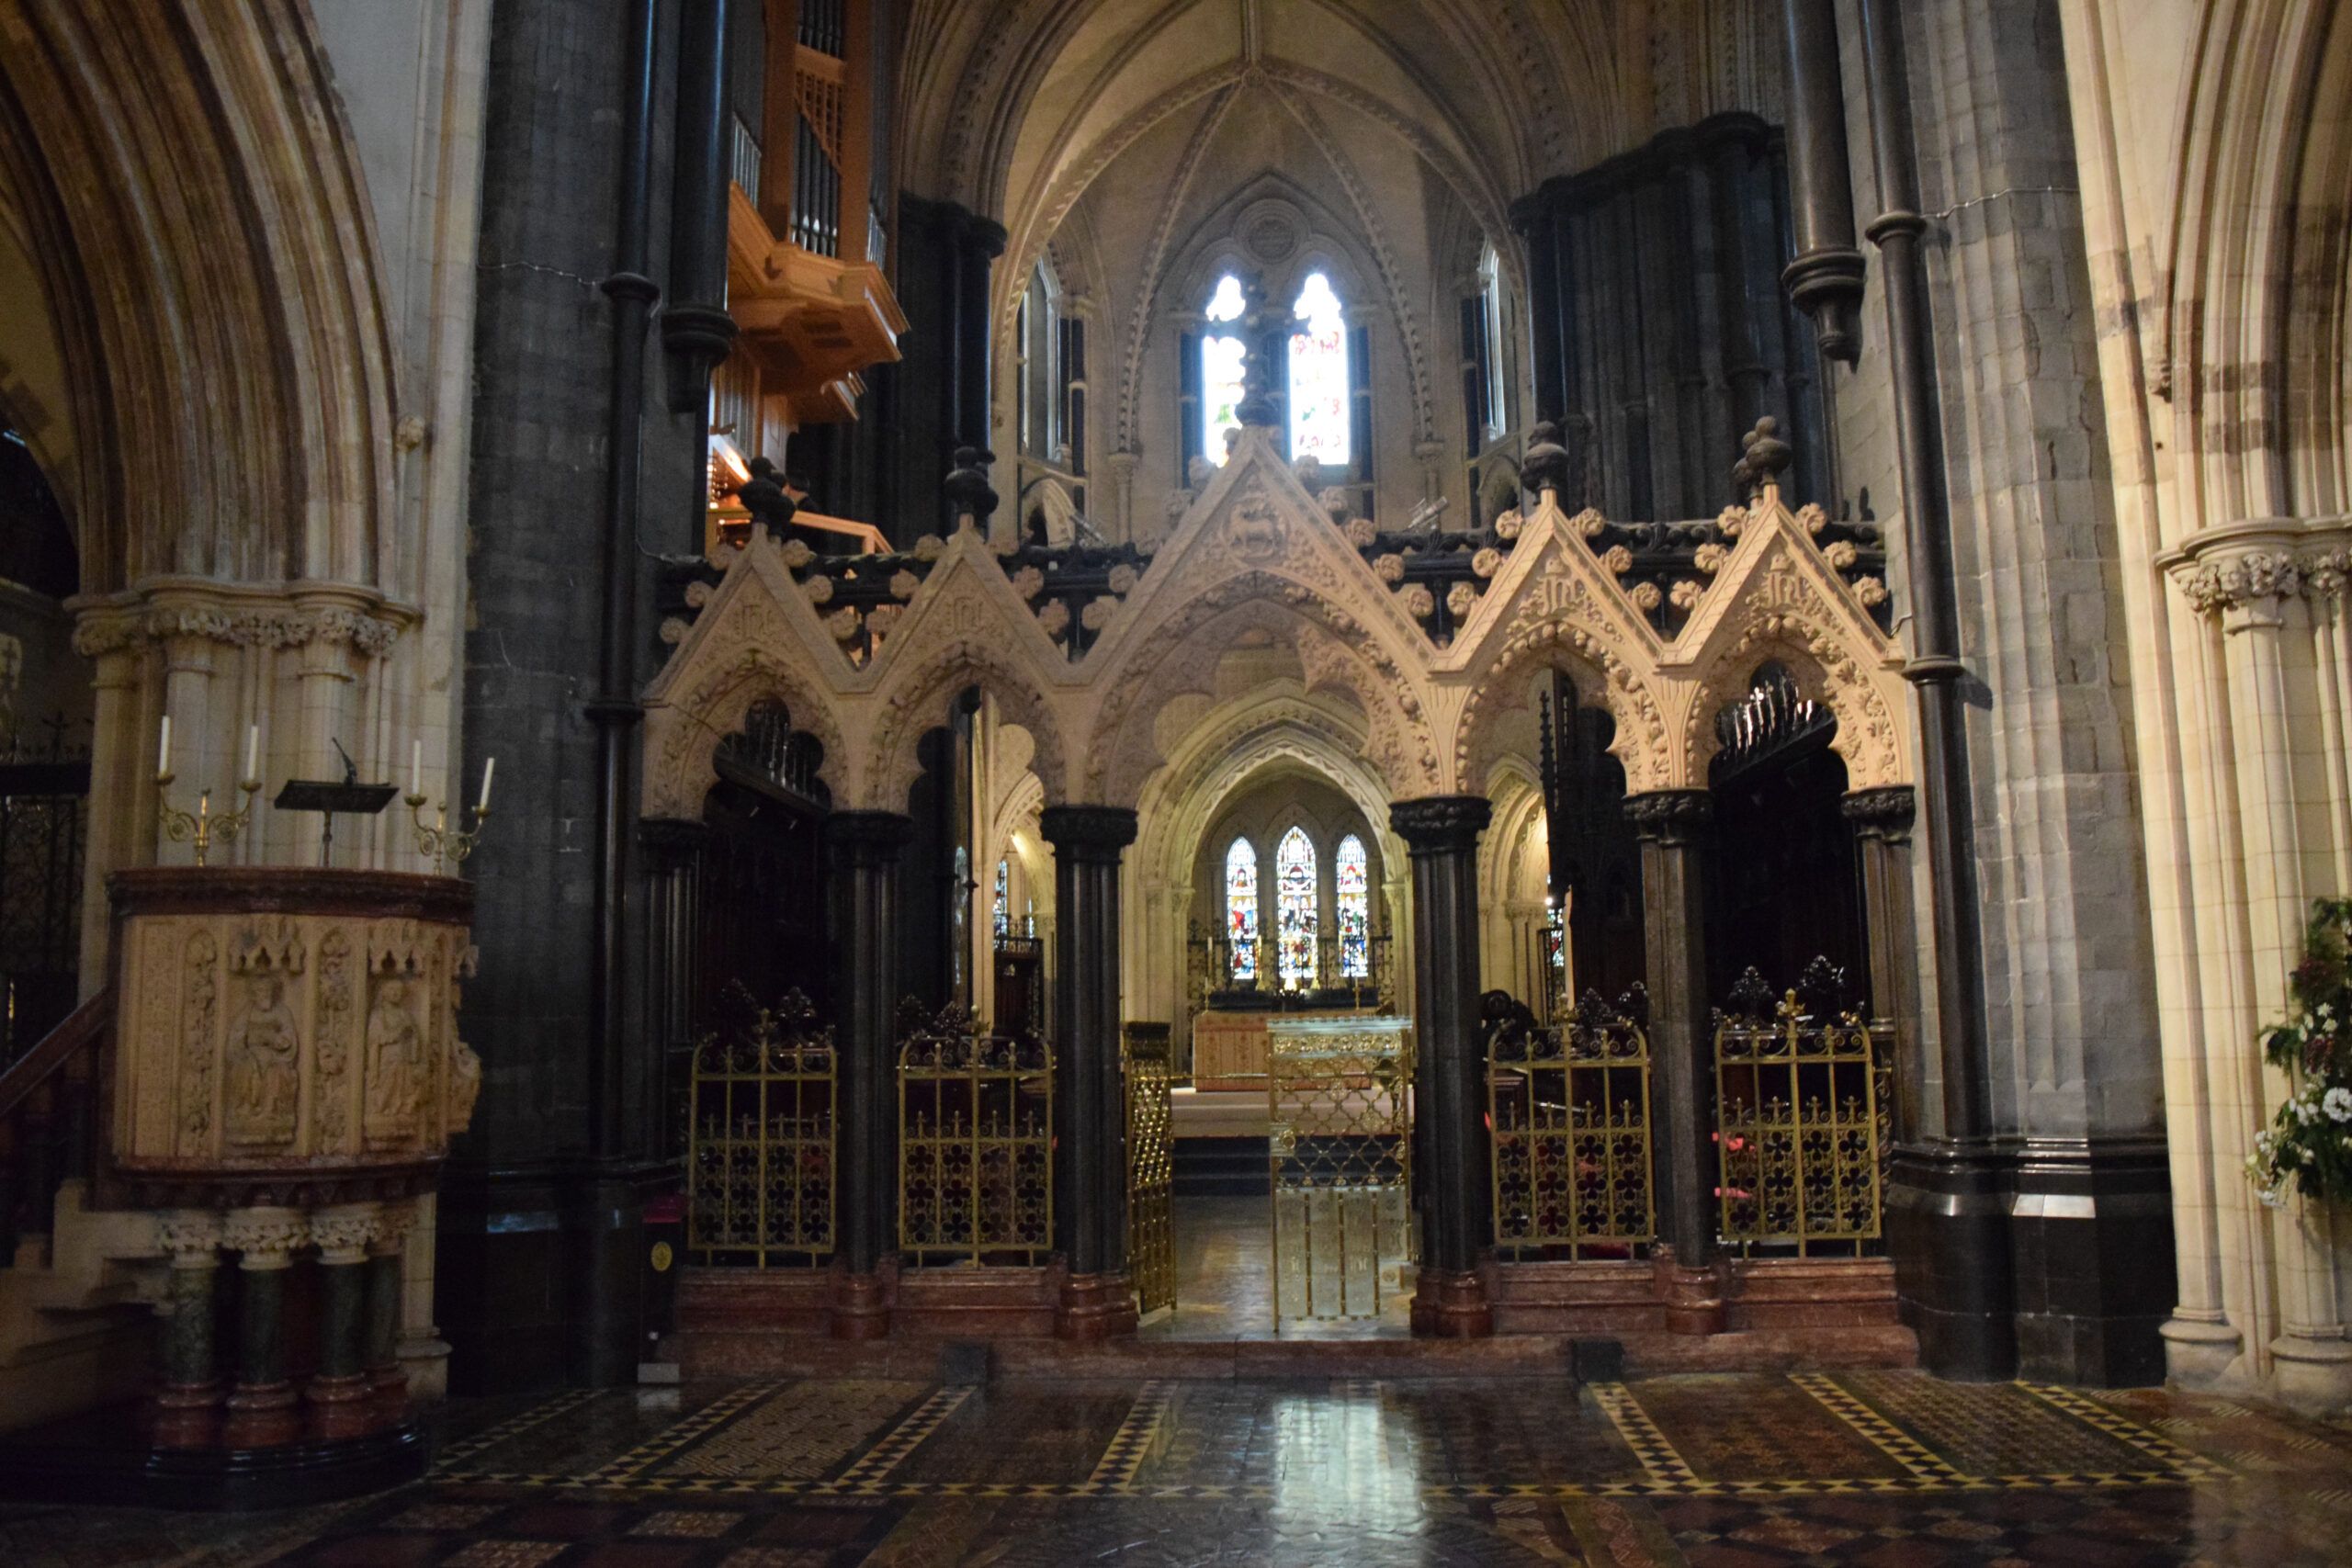 Inside Christ's Cathedral in Dublin, Ireland